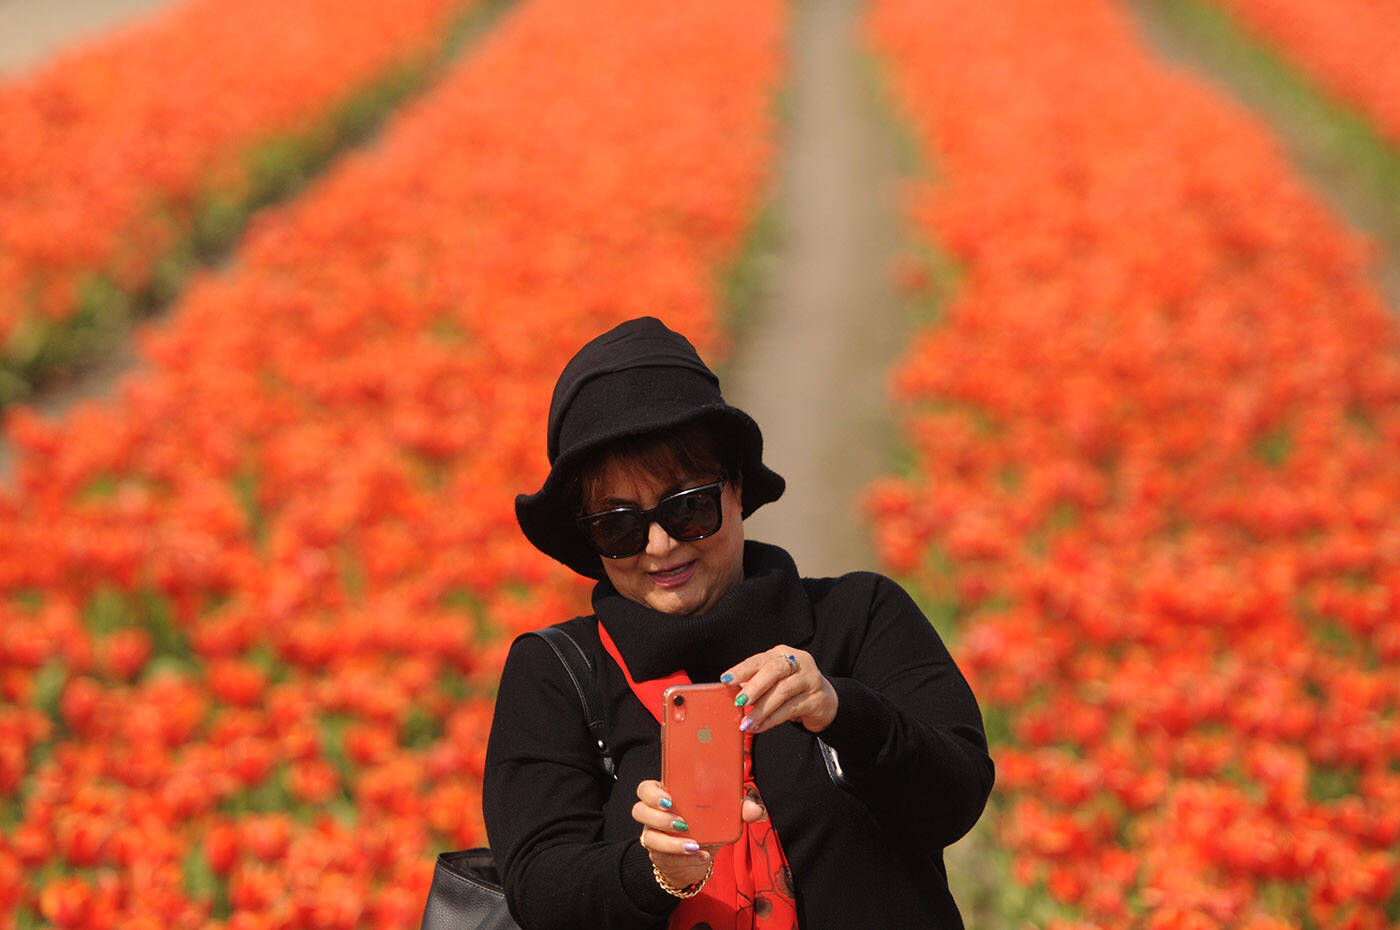 A woman takes a photo during the Chilliwack Tulip Festival on Saturday, April 23, 2022. The event runs until May 1. (Jenna Hauck/ Chilliwack Progress)